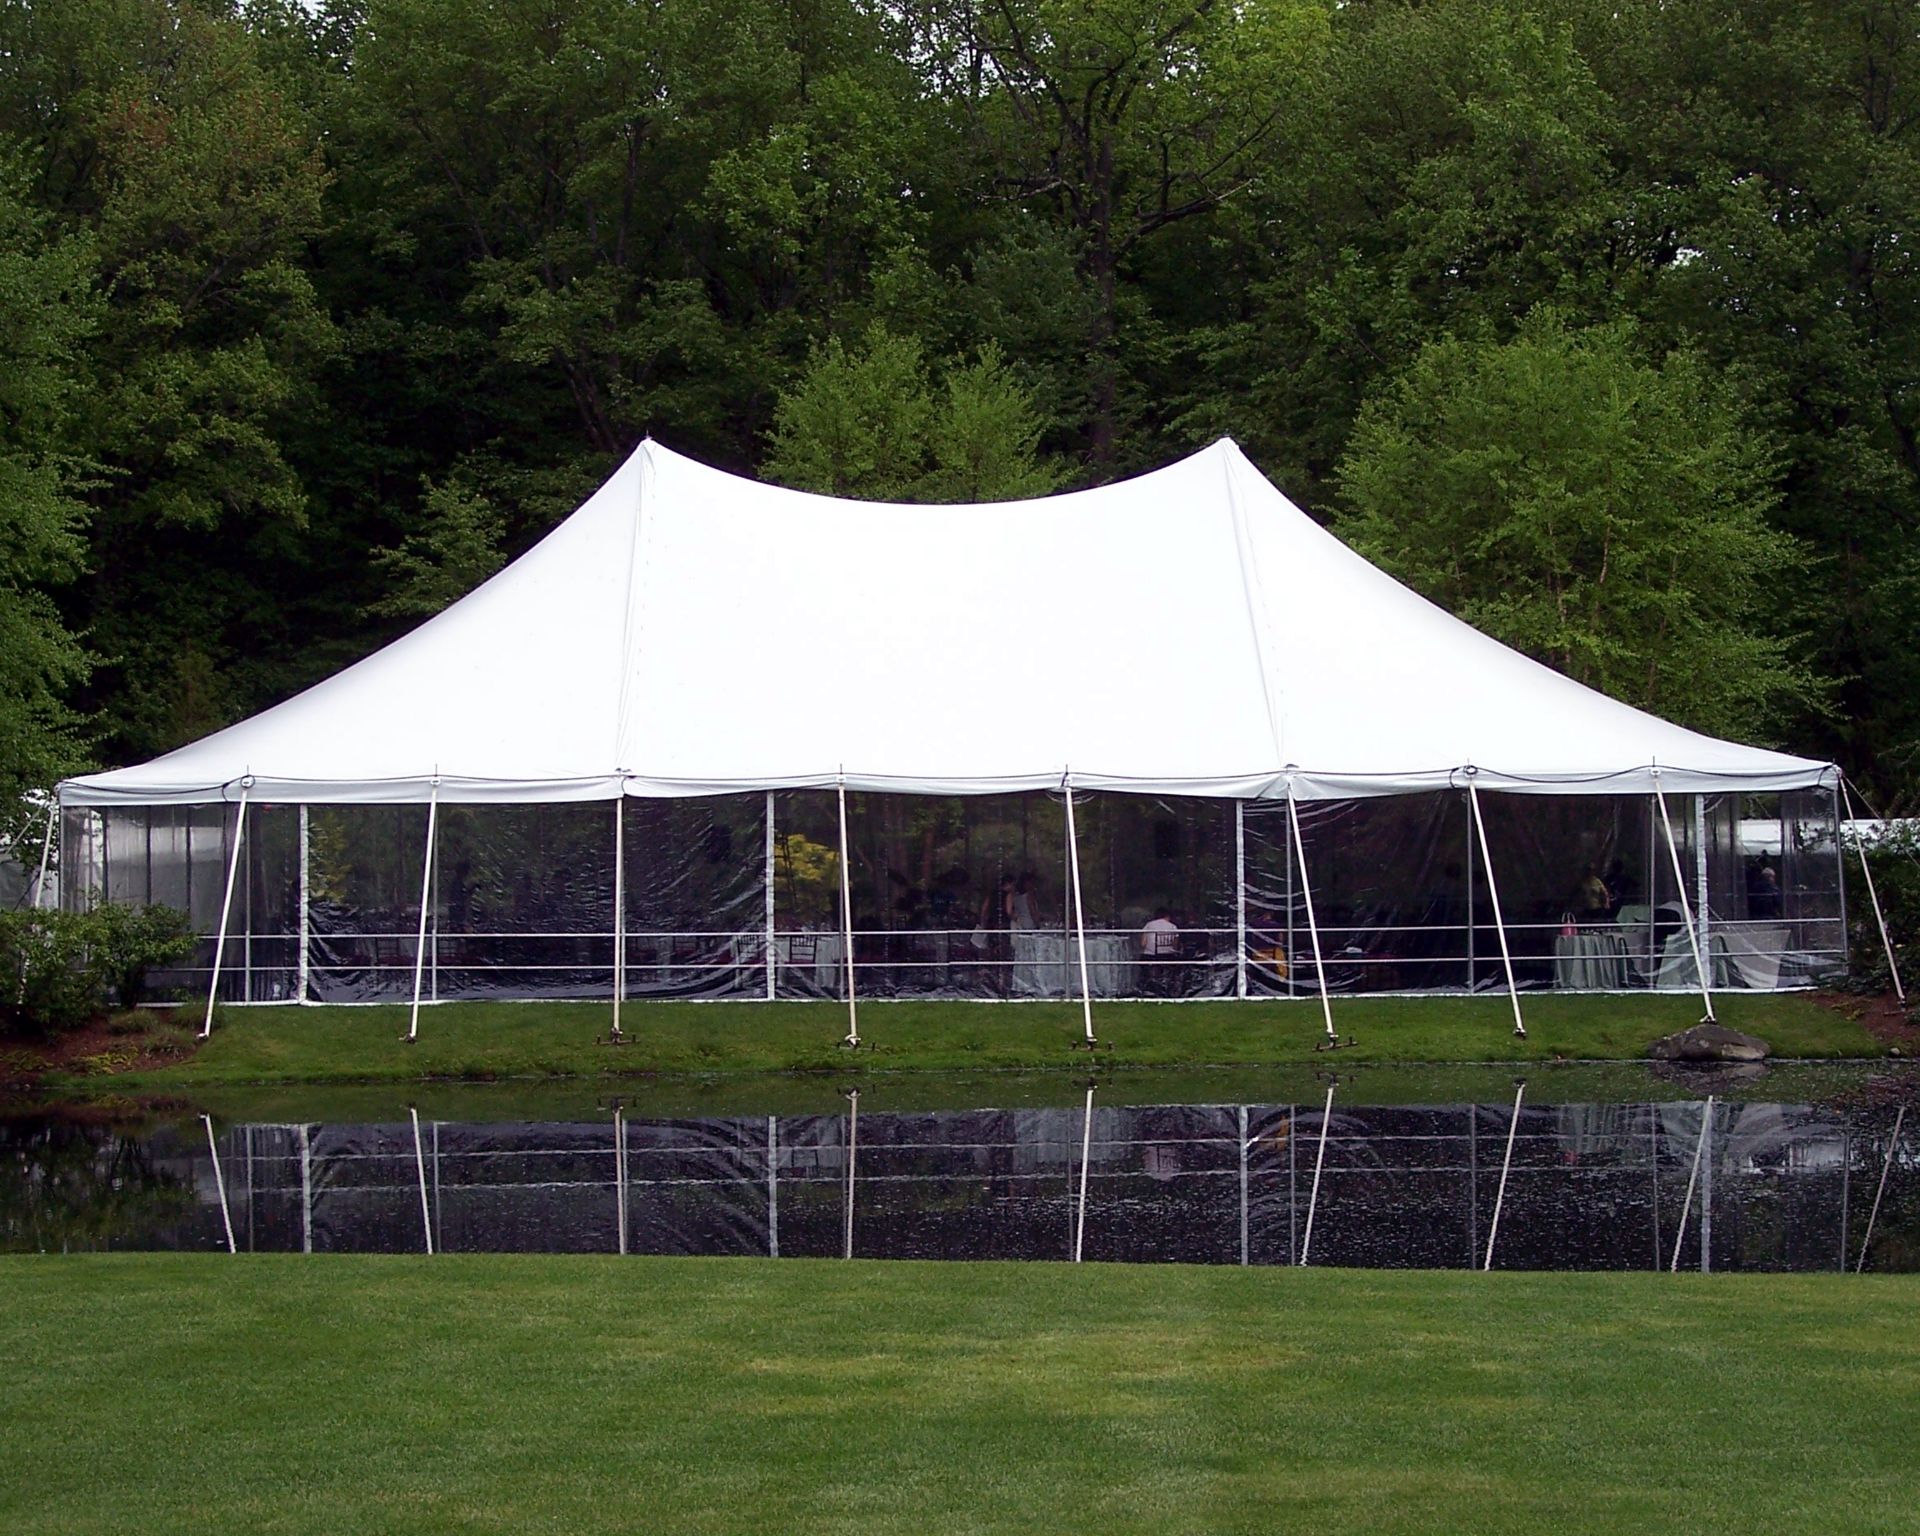 50x120 White Genesis High Peak Pole Tent, Top Only. Grade B. 2-25' ends, 1-30' mid, 2-20' mids - Image 2 of 4